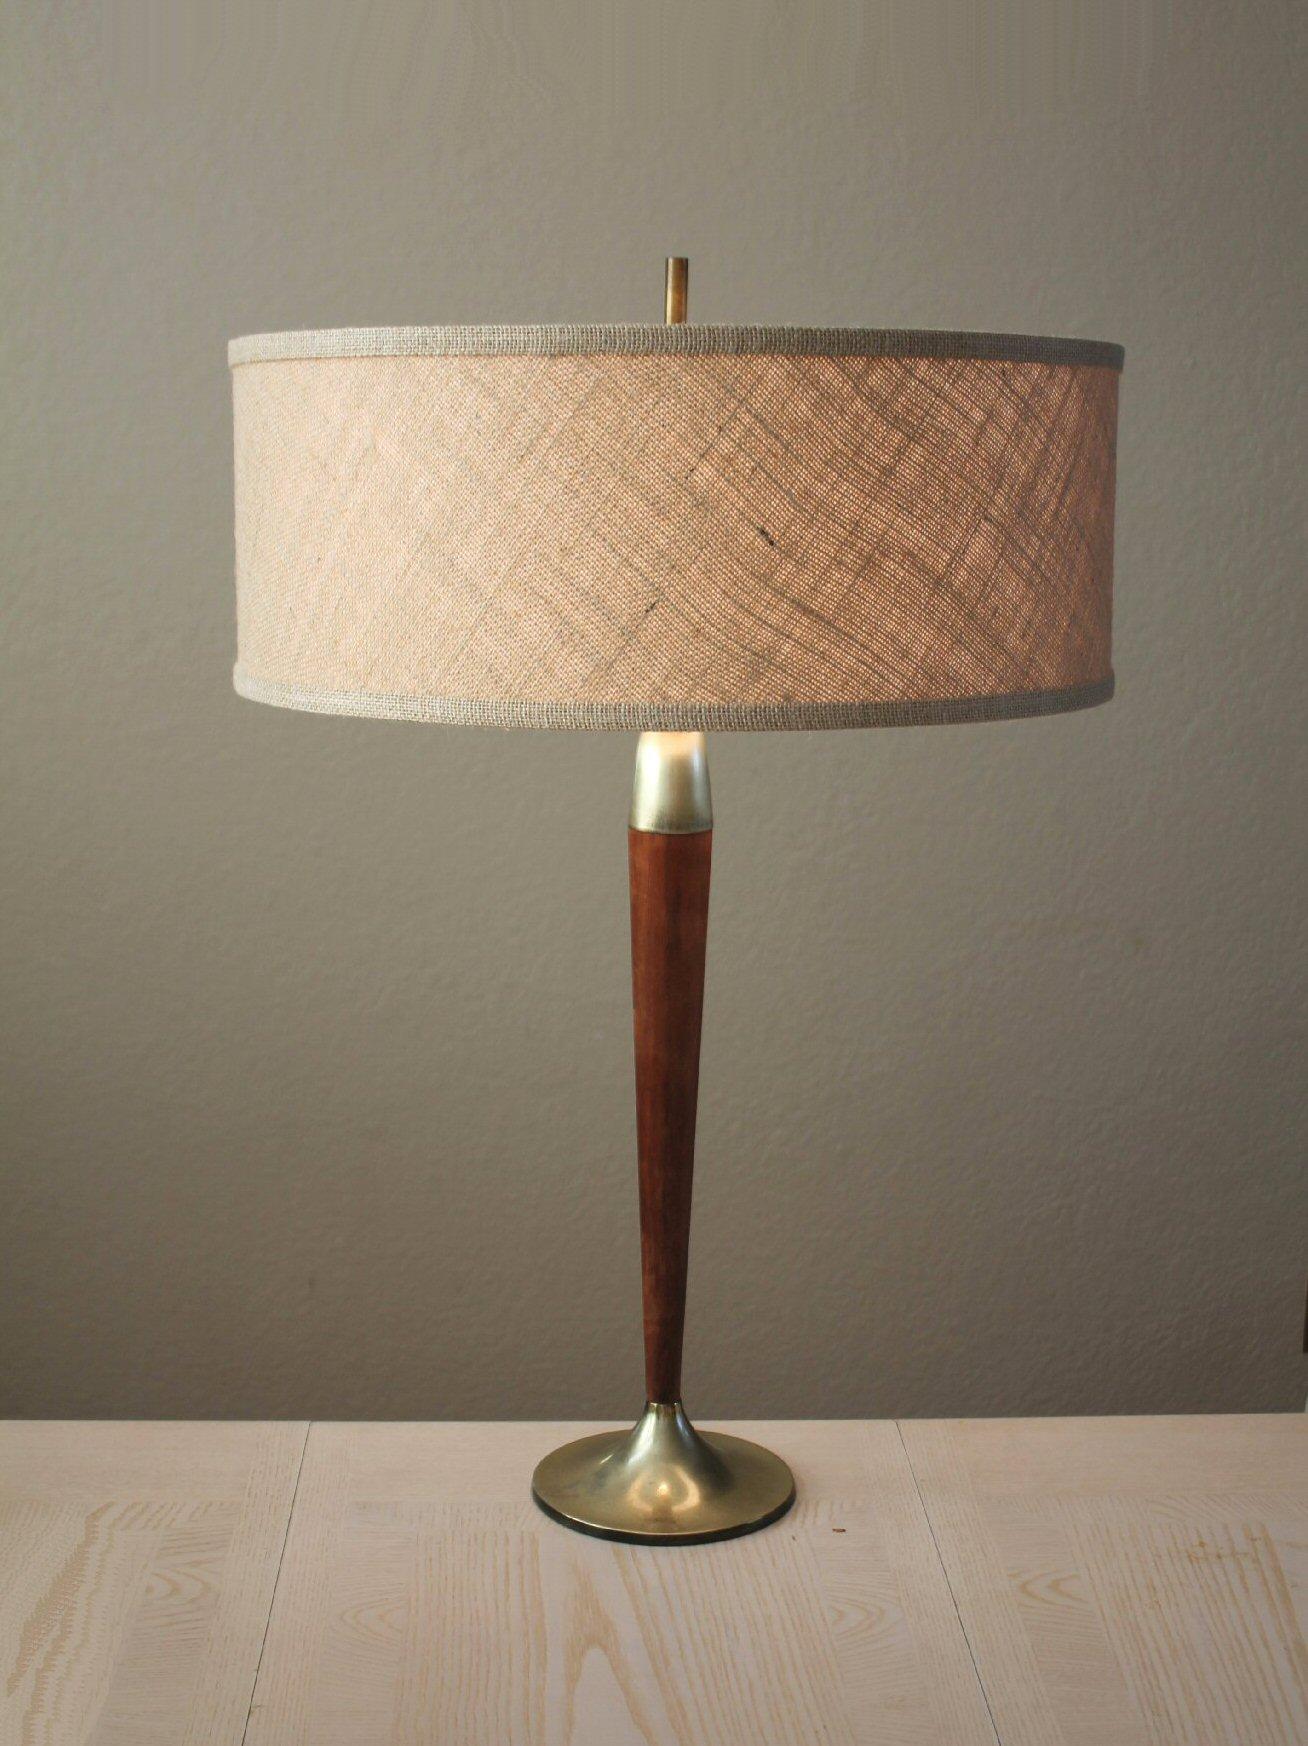 GORGEOUS!


  
SCULPTURED DANISH MODERN
TORPEDO SHAPED WALNUT & BRASS
TABLE LAMP!

THE CLEANEST LINES & STYLE!

 BEAUTIFUL!

( DIMENSIONS:  APPROX. 28